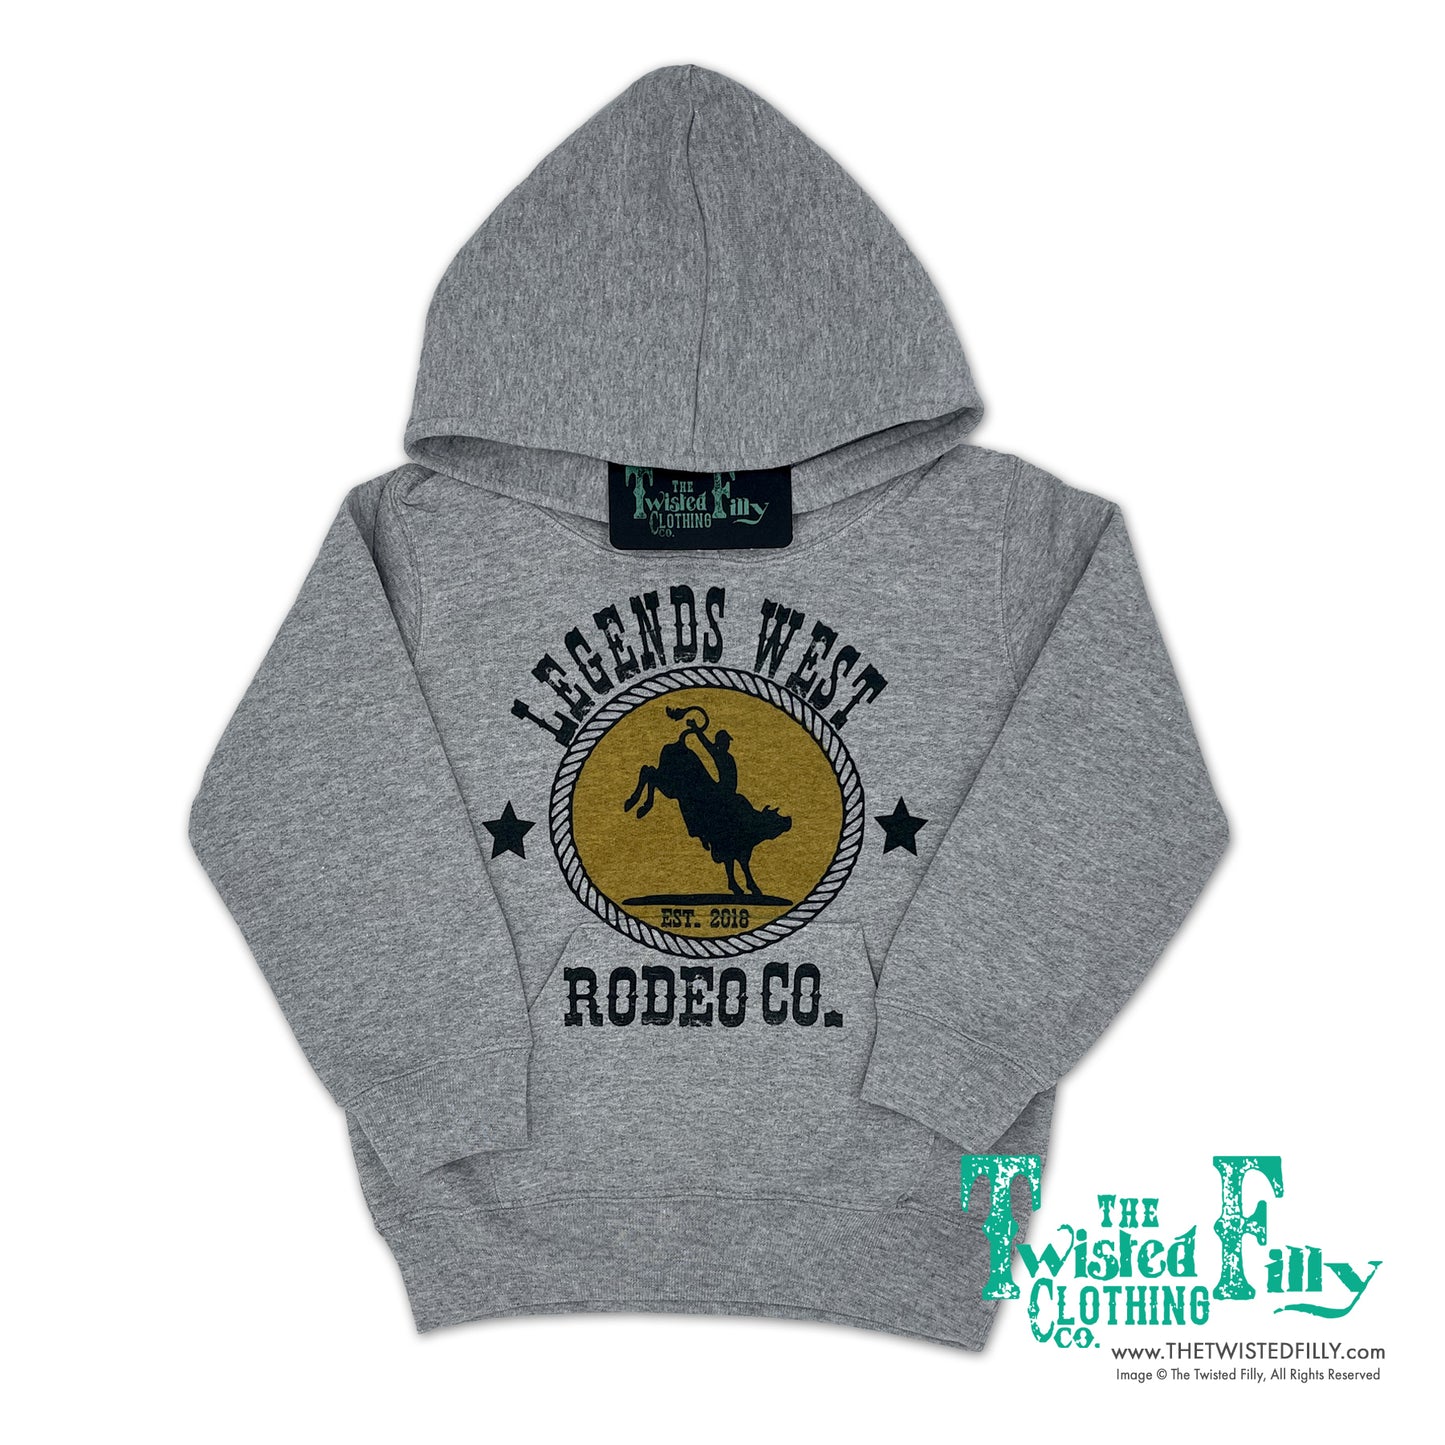 Legends West Rodeo Co. Bull Rider - Toddler Hoodie - Gray